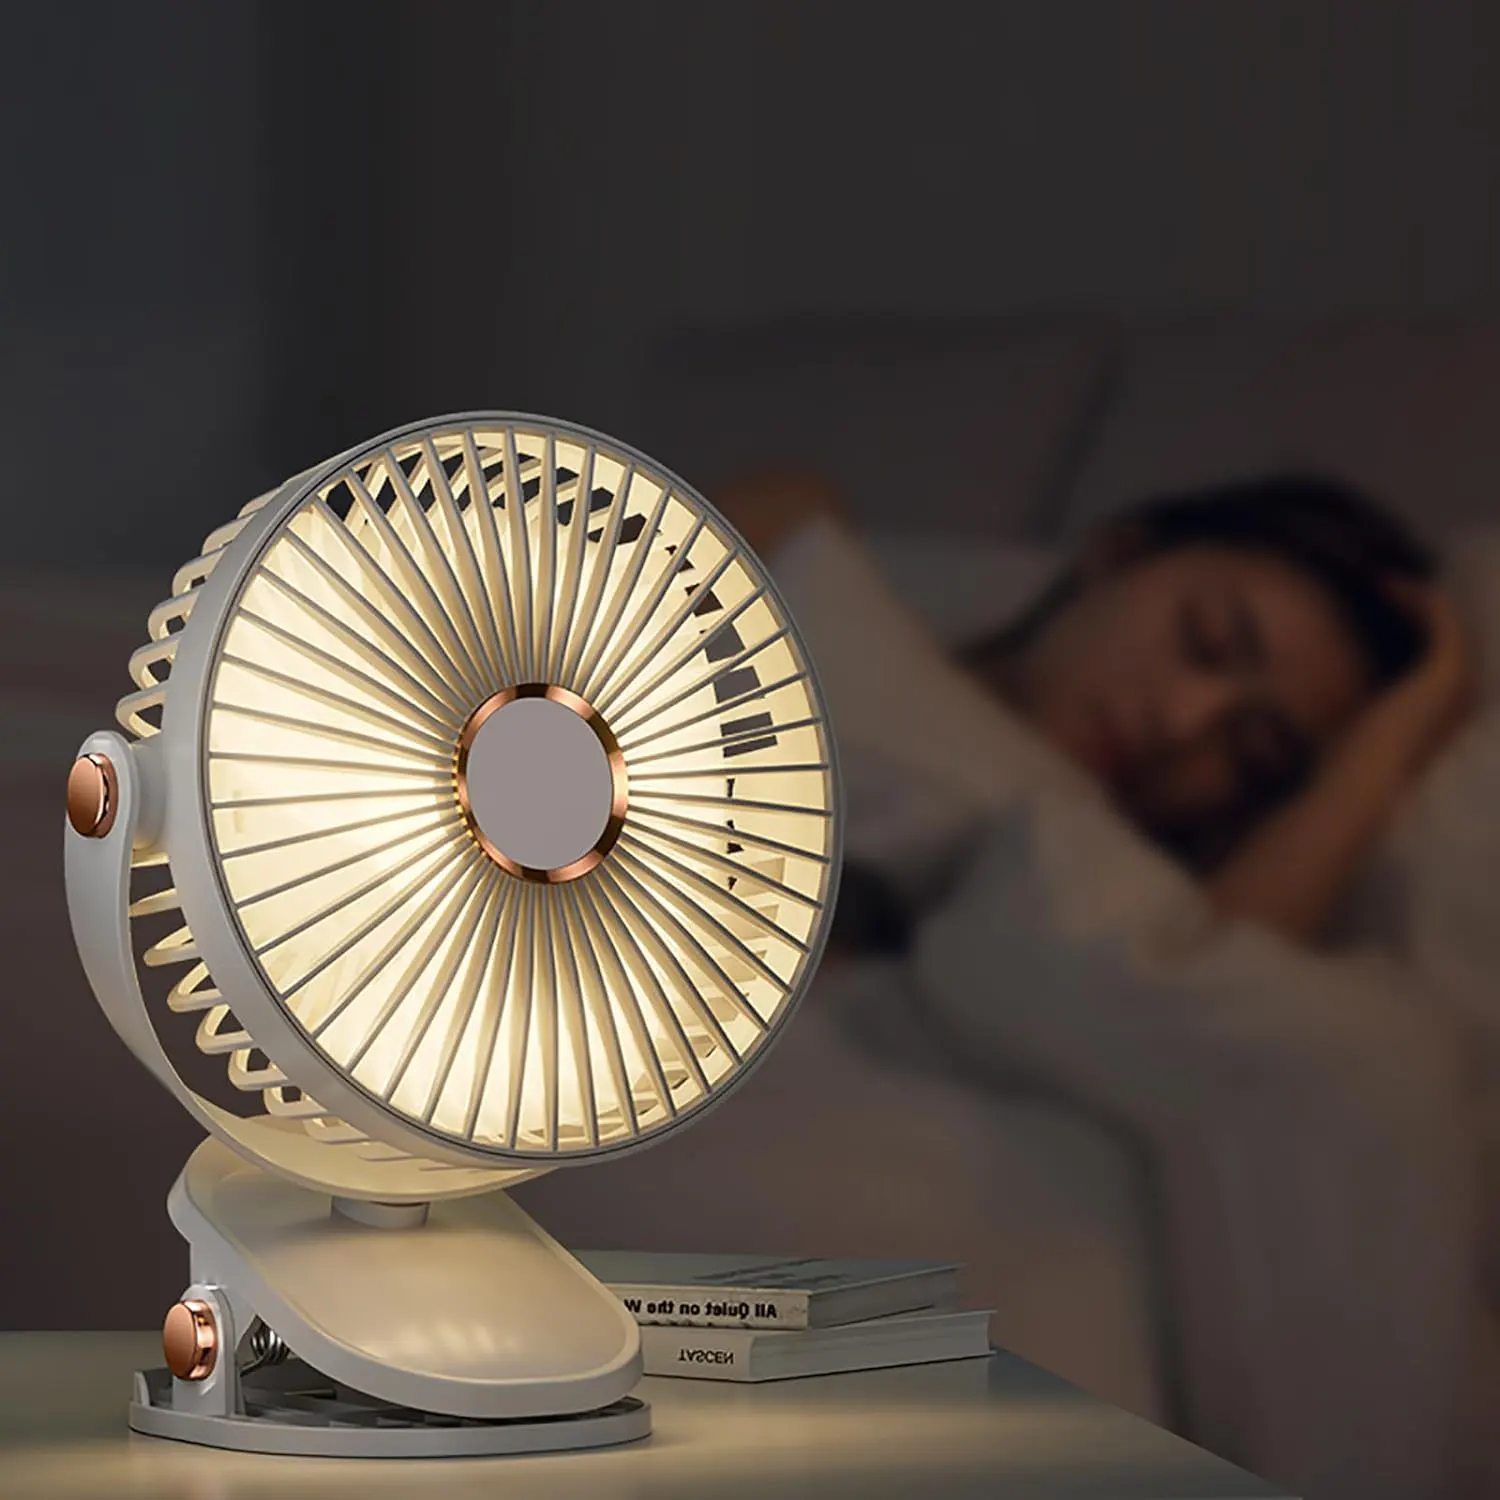 Small portable fan powered by USB charging, clip-on shape, equipped with a rotatable stand, colors